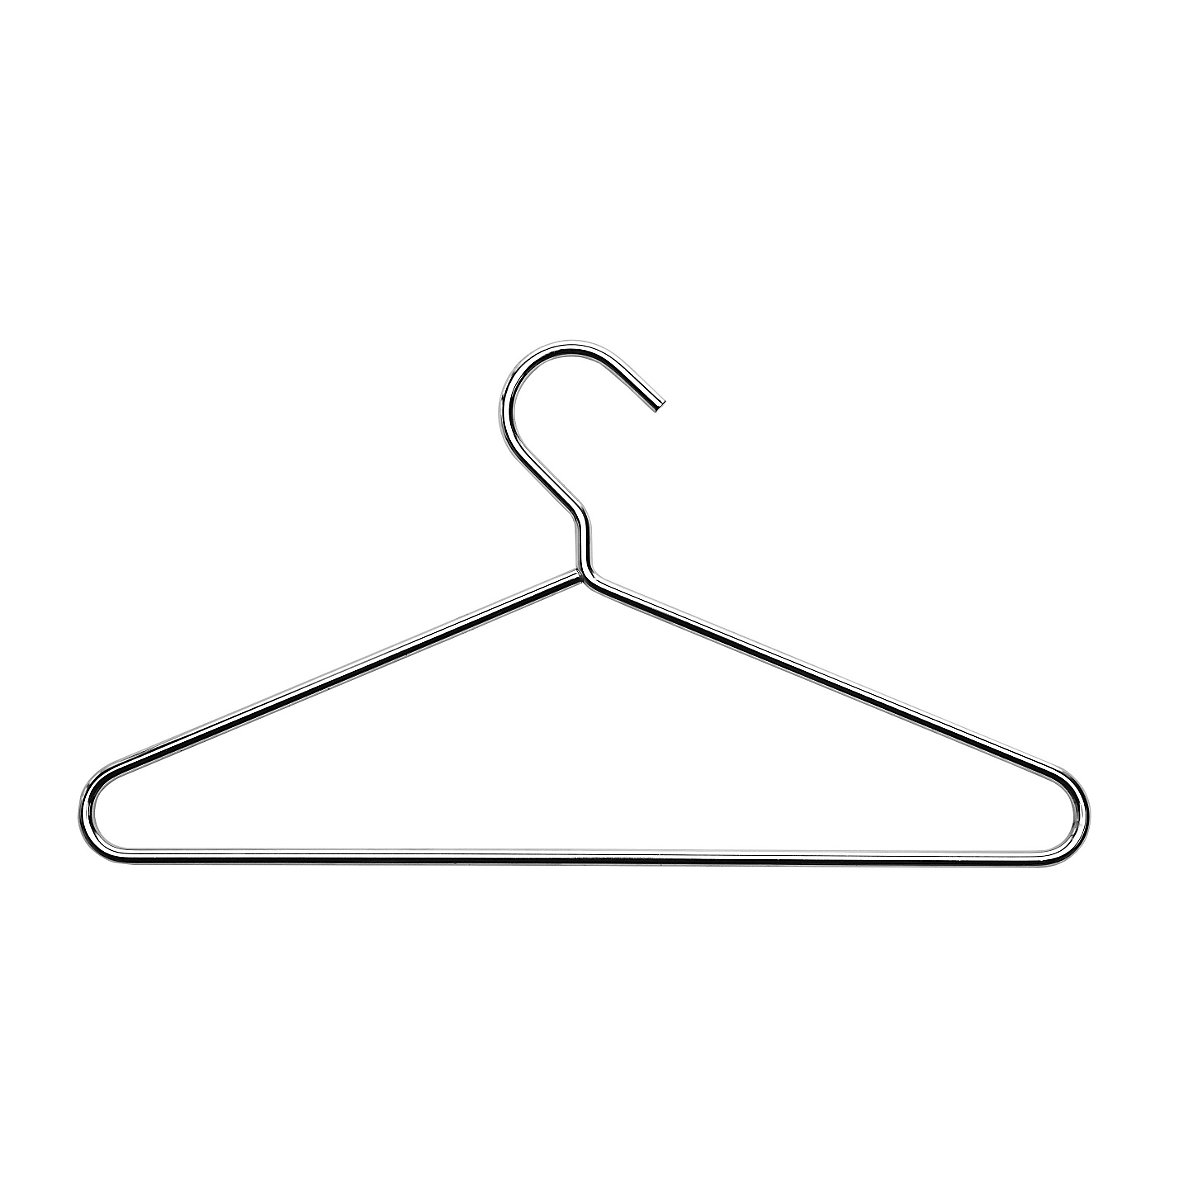 https://images.kkeu.de/is/image/BEG/Accessories_office/Additional_accessory_products/Coat_hanger_pdplarge-mrd--000025157718_PRD_org_all.jpg